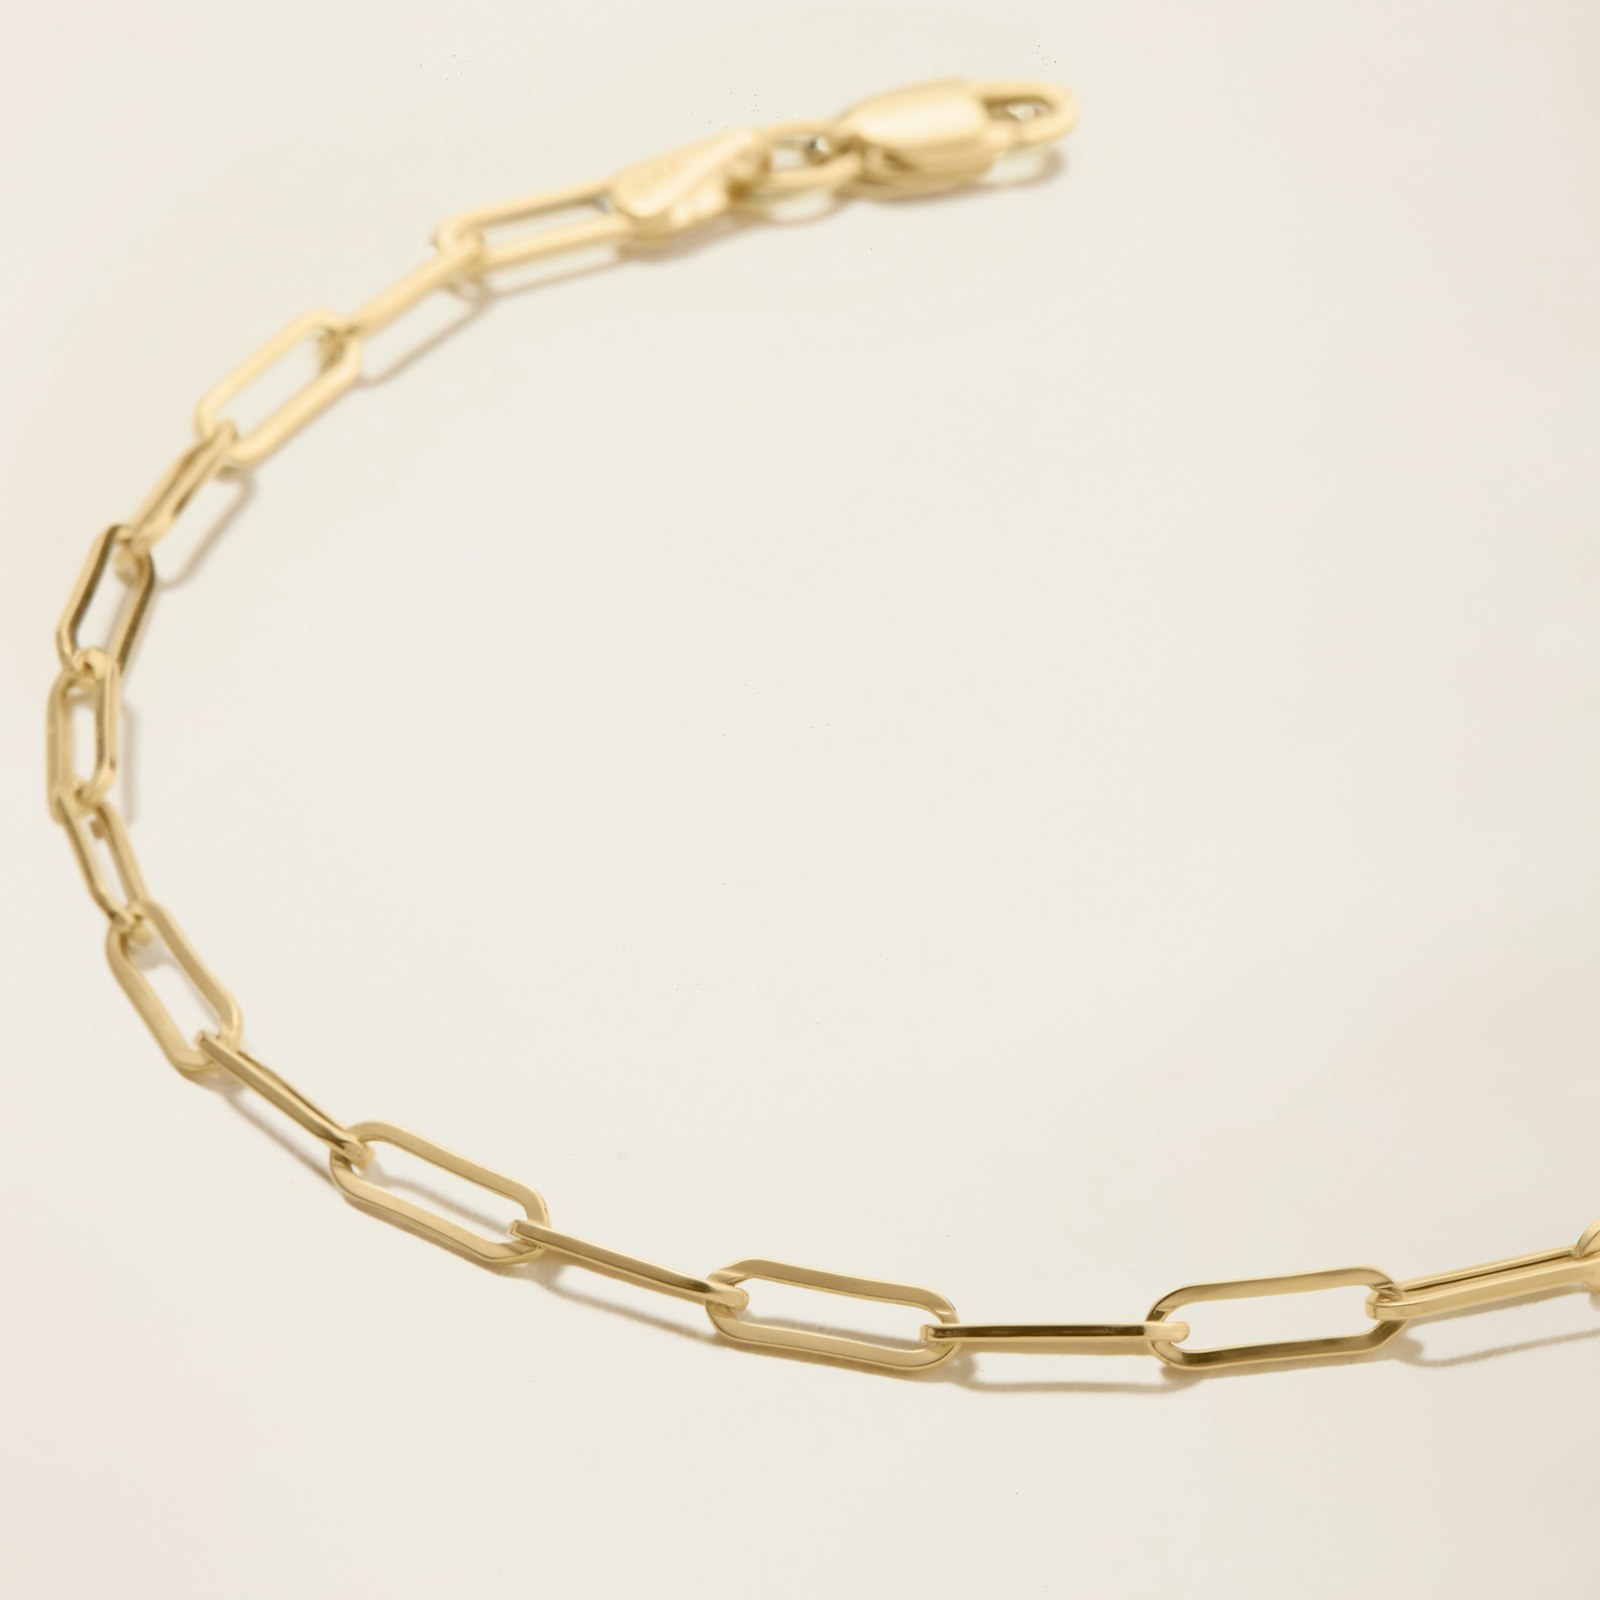 14K Solid Gold Paper Clip Chain Bracelet_Yellow Gold_Jewelry_Product_1x1_A_0164_FrontFocus.jpg